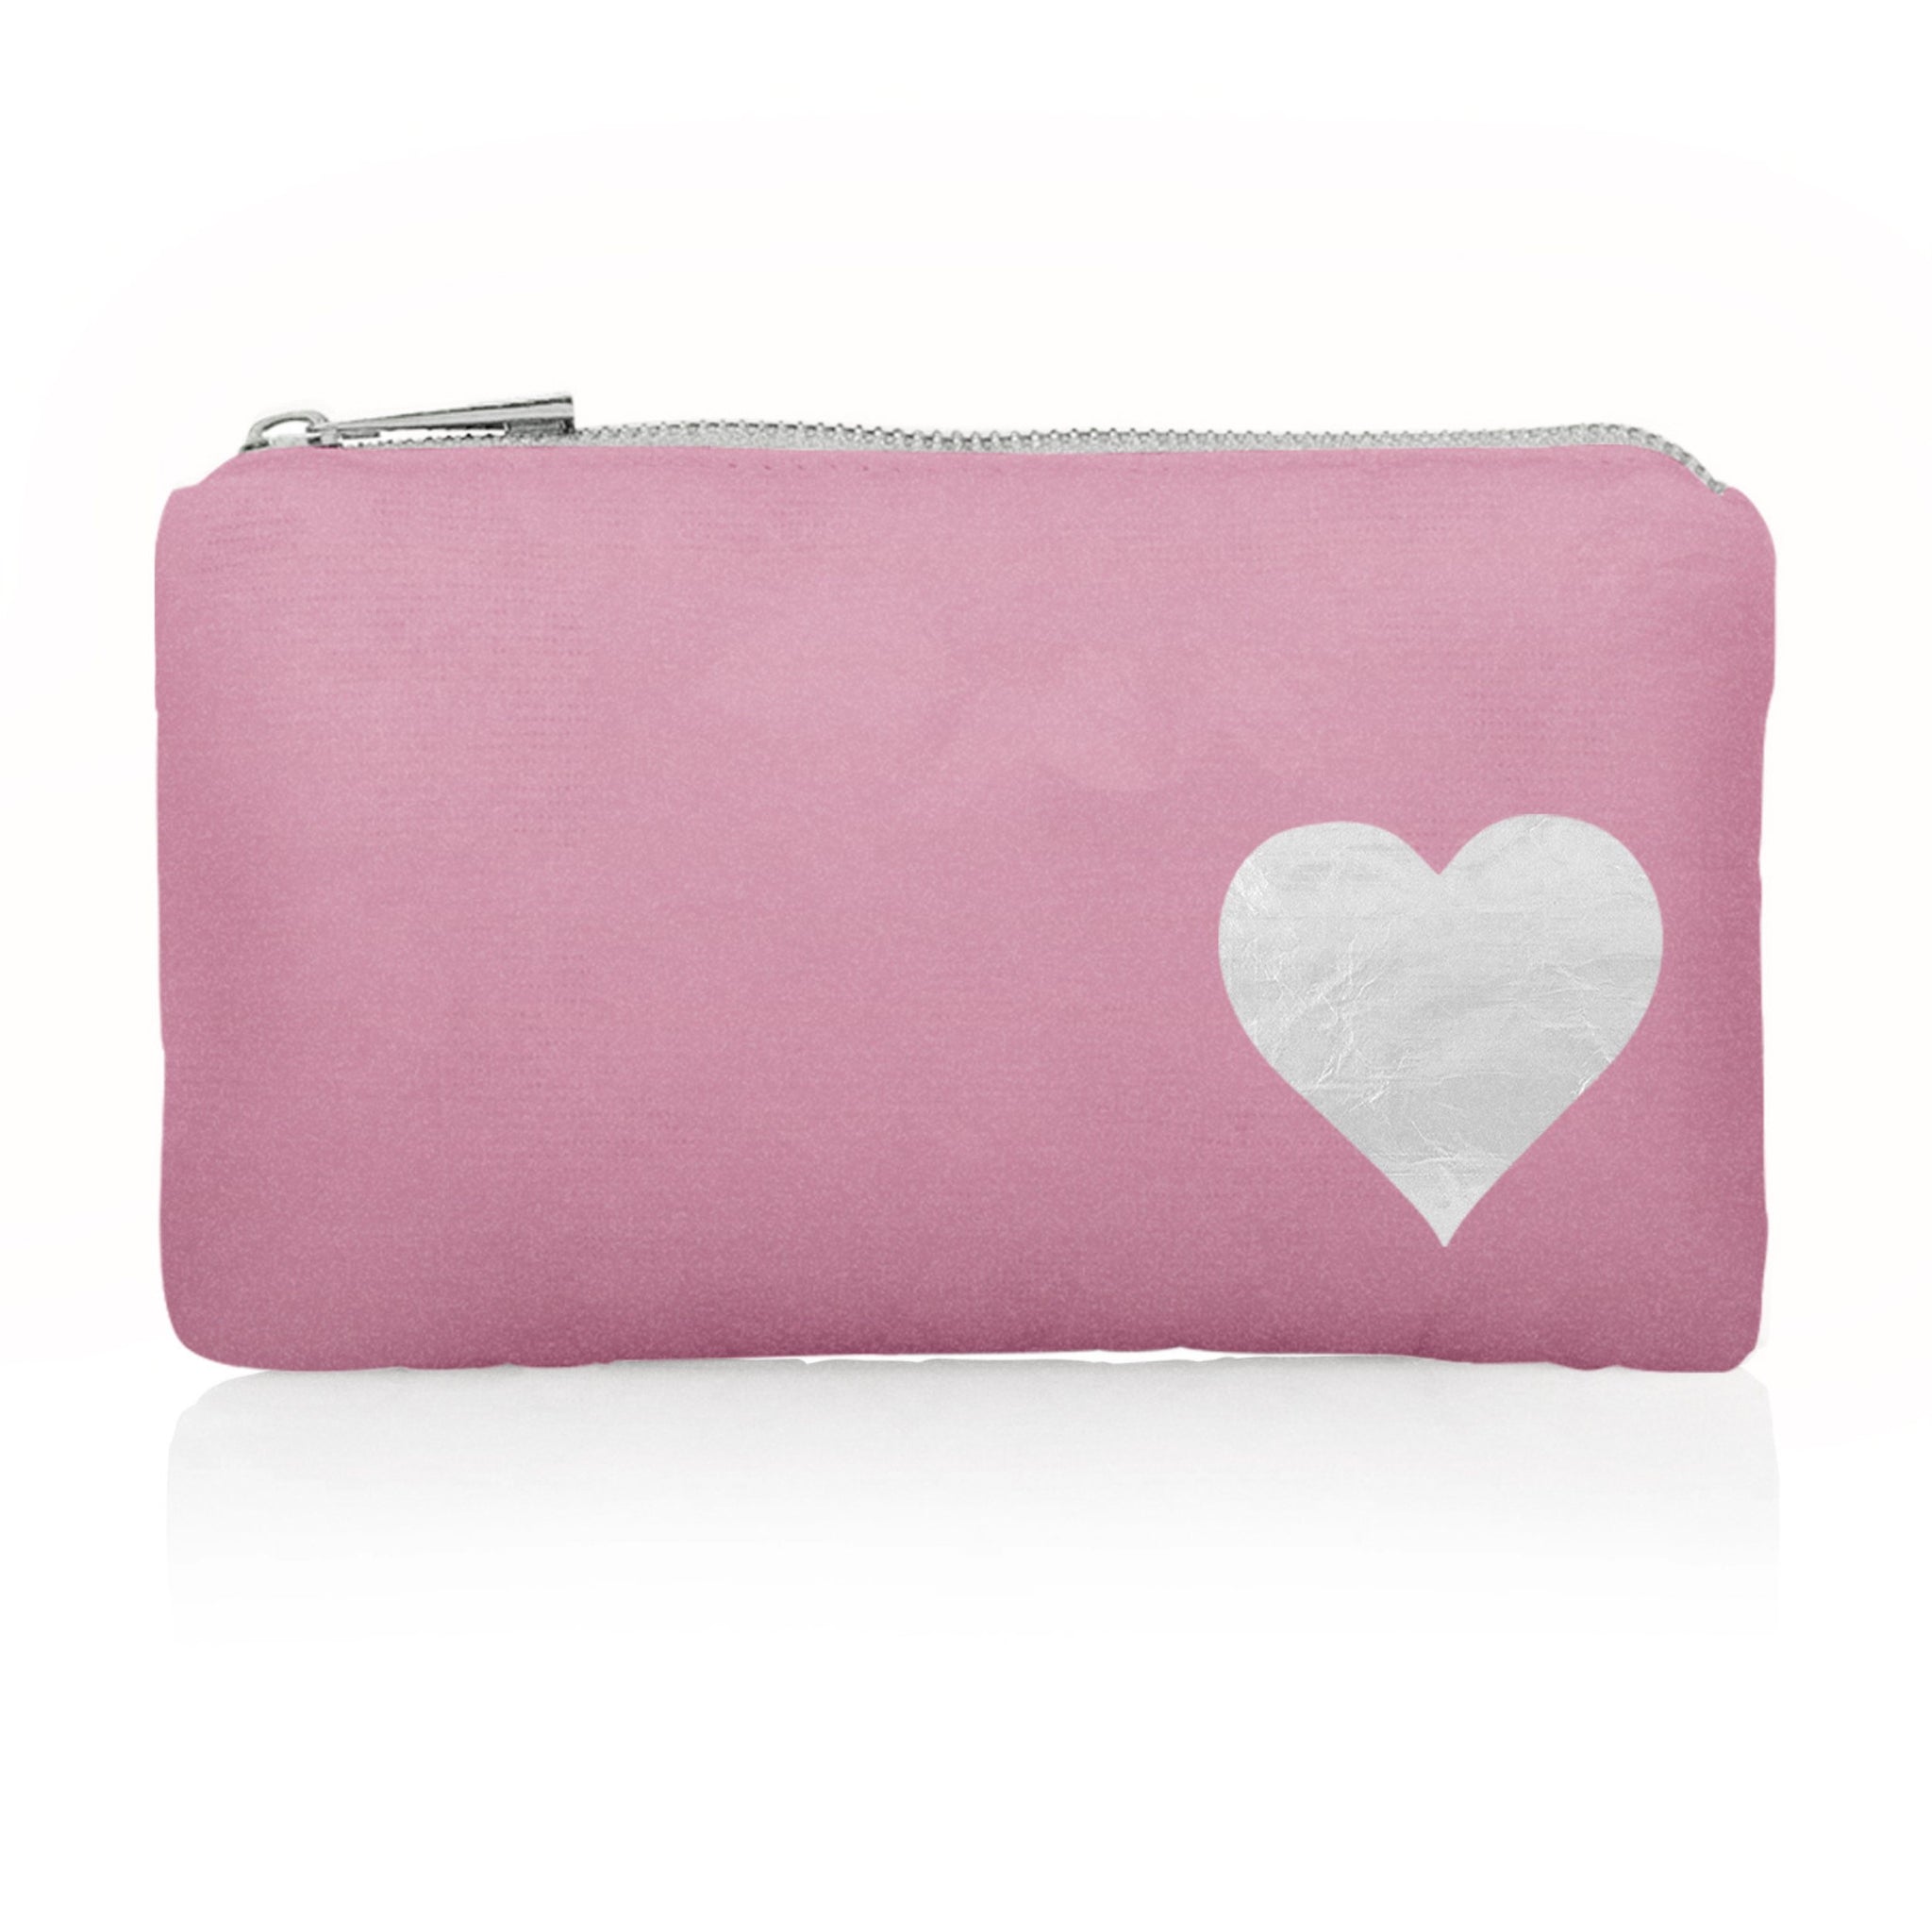 Mini Zipper Pack in Fairy Pink with Silver Heart